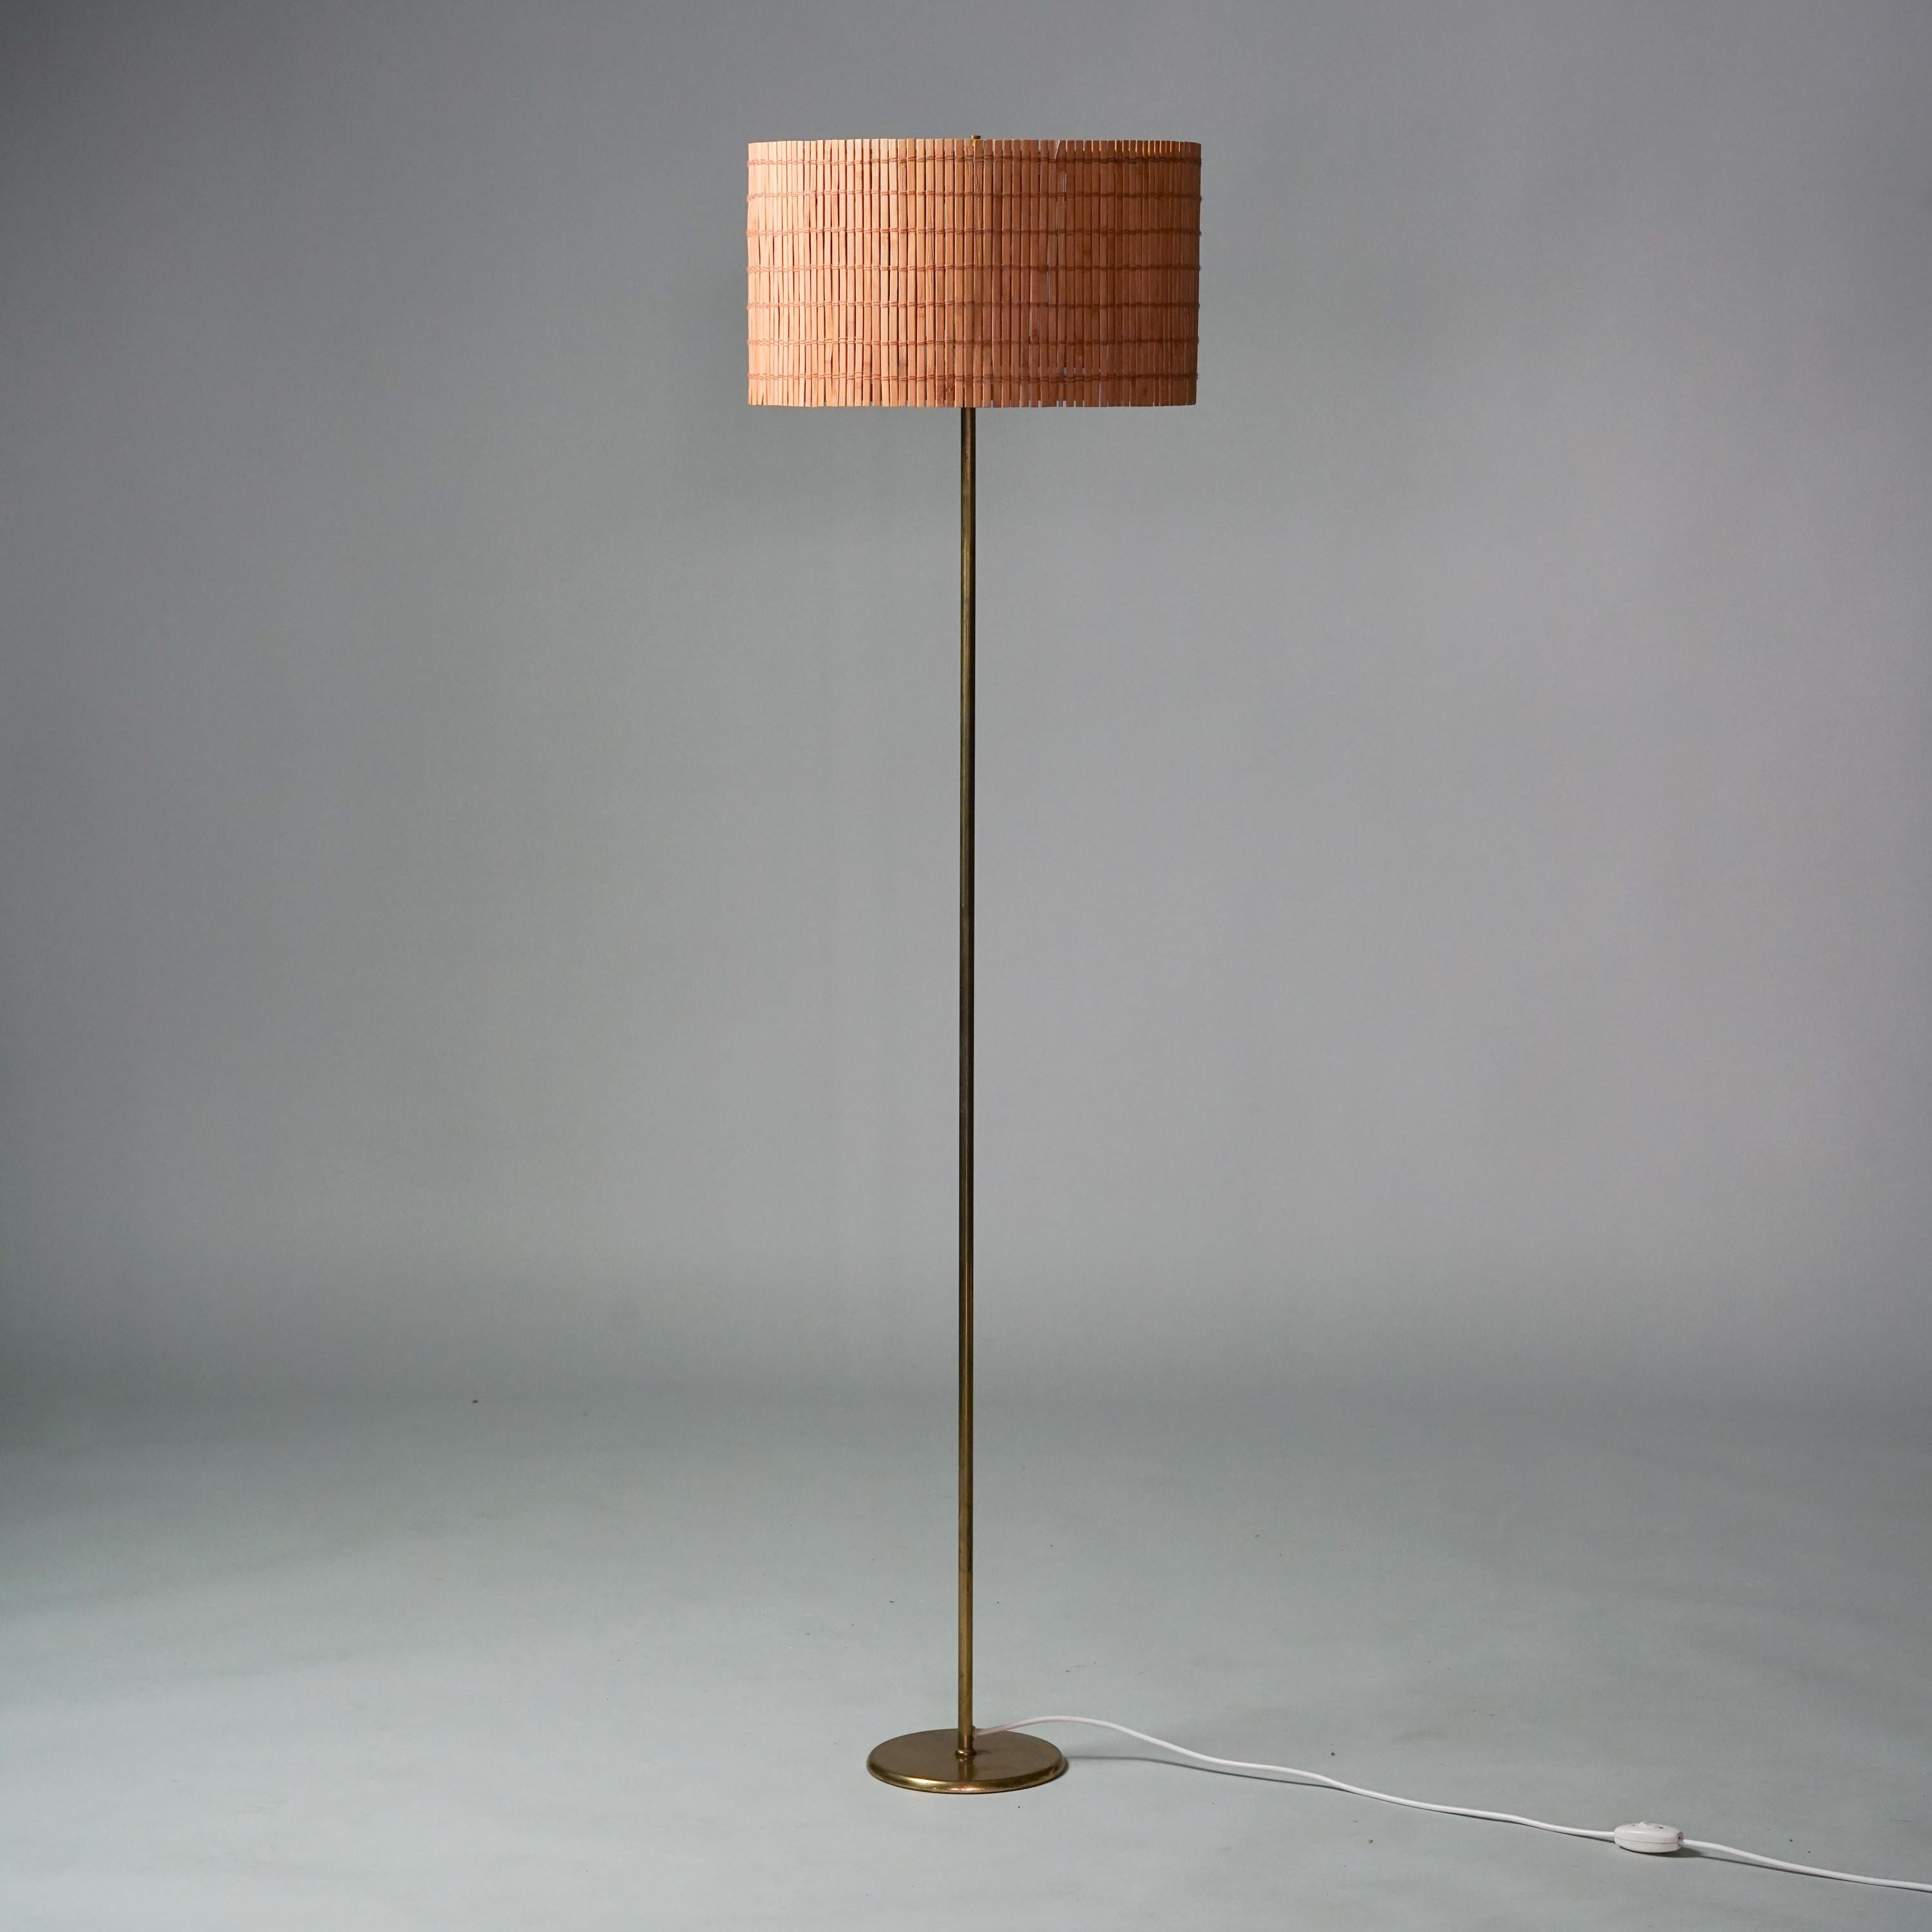 Model 9633 floor lamp, designed by Paavo Tynell, manufactured by Taito Oy, 1940/1950s. Brass frame with handmade wooden slat shade. Good vintage condition, minor patina consistent with age and use. Stamped Taito Oy.

Paavo Tynell (1890-1973) is one